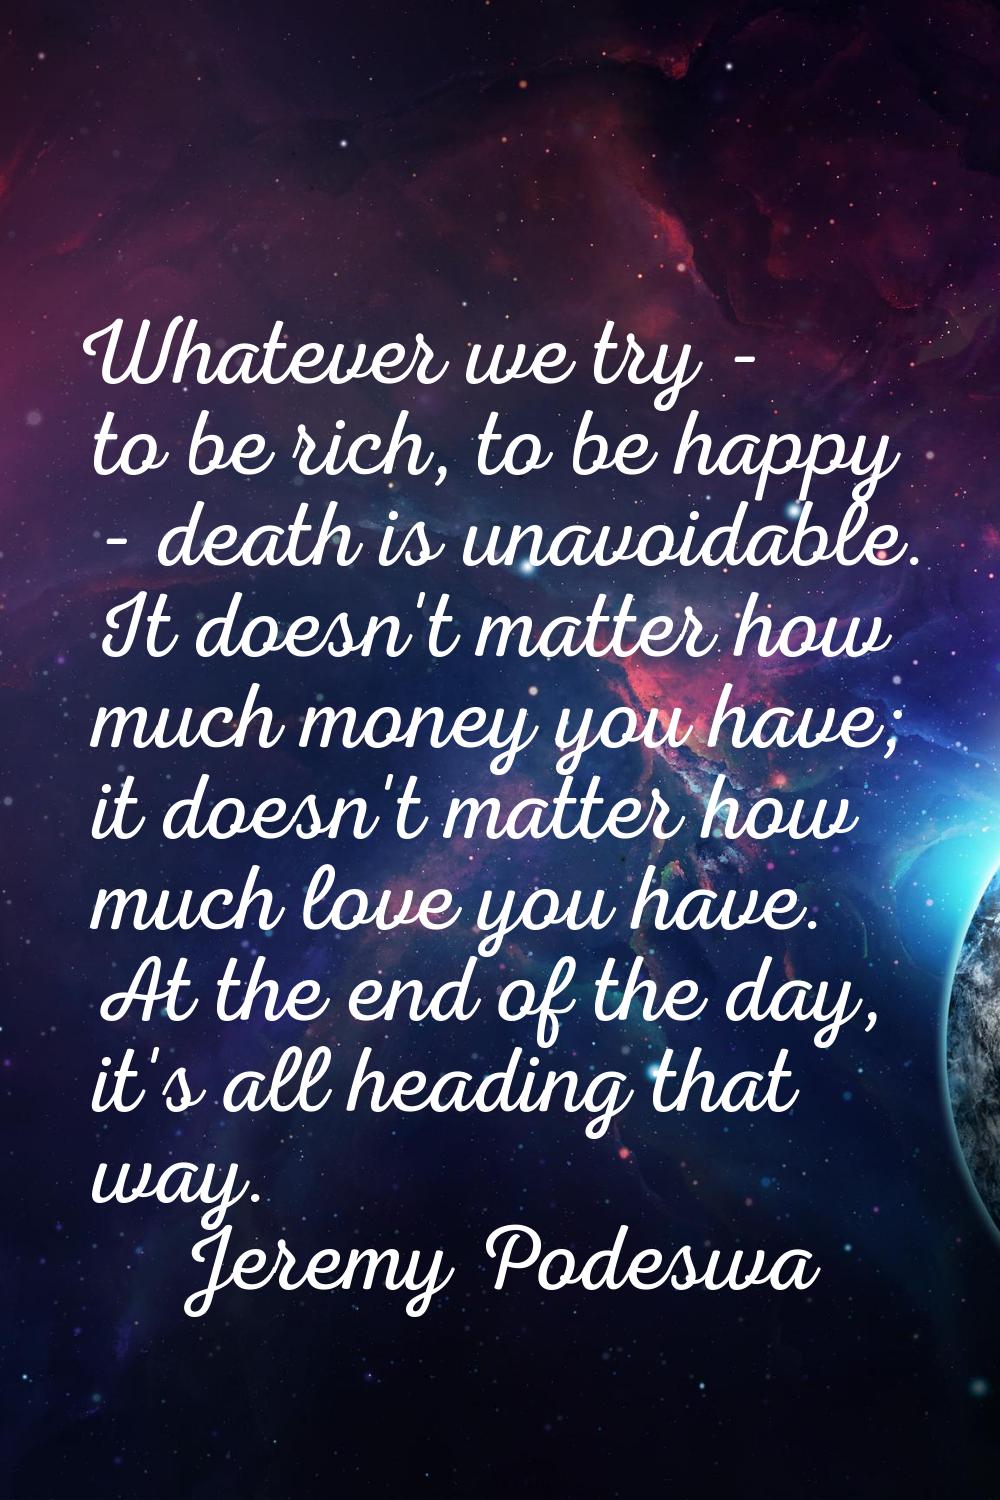 Whatever we try - to be rich, to be happy - death is unavoidable. It doesn't matter how much money 